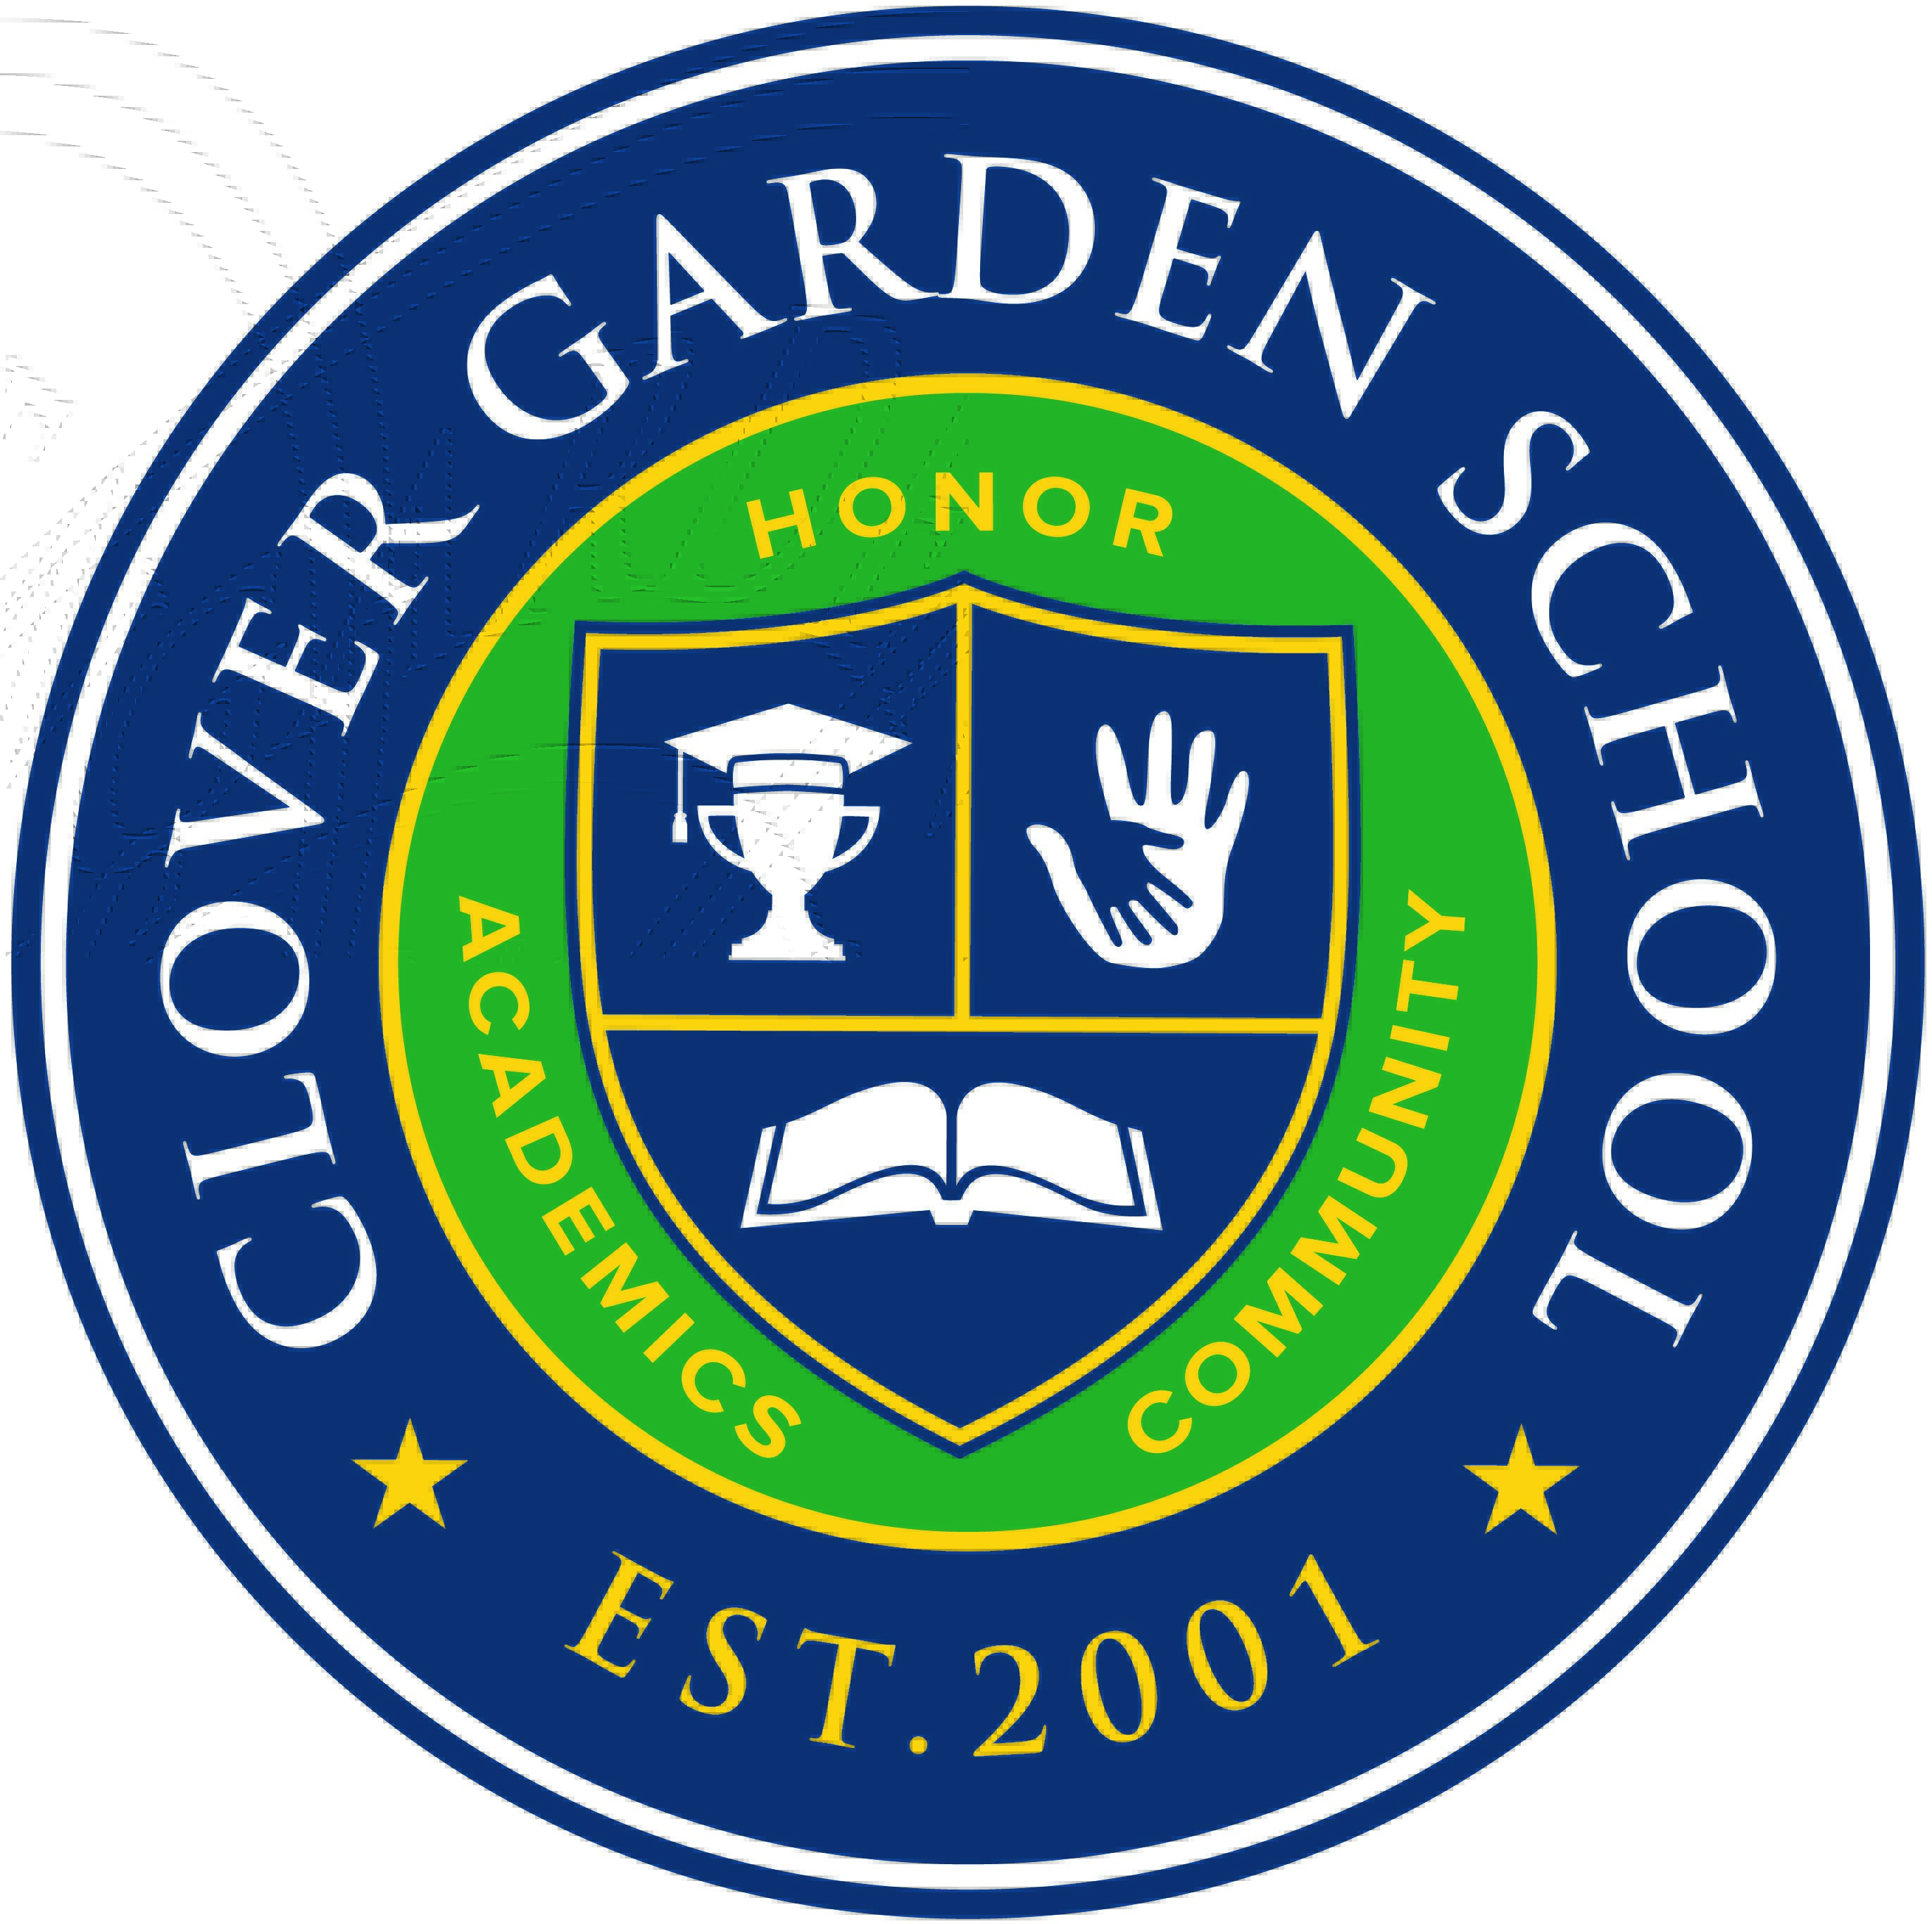 Seal of Clover Garden School. A shield with three sections. Top left is a trophy cup with a graduation mortarboard, top right is 2 hands clasping. Shield is surrounded by words: 